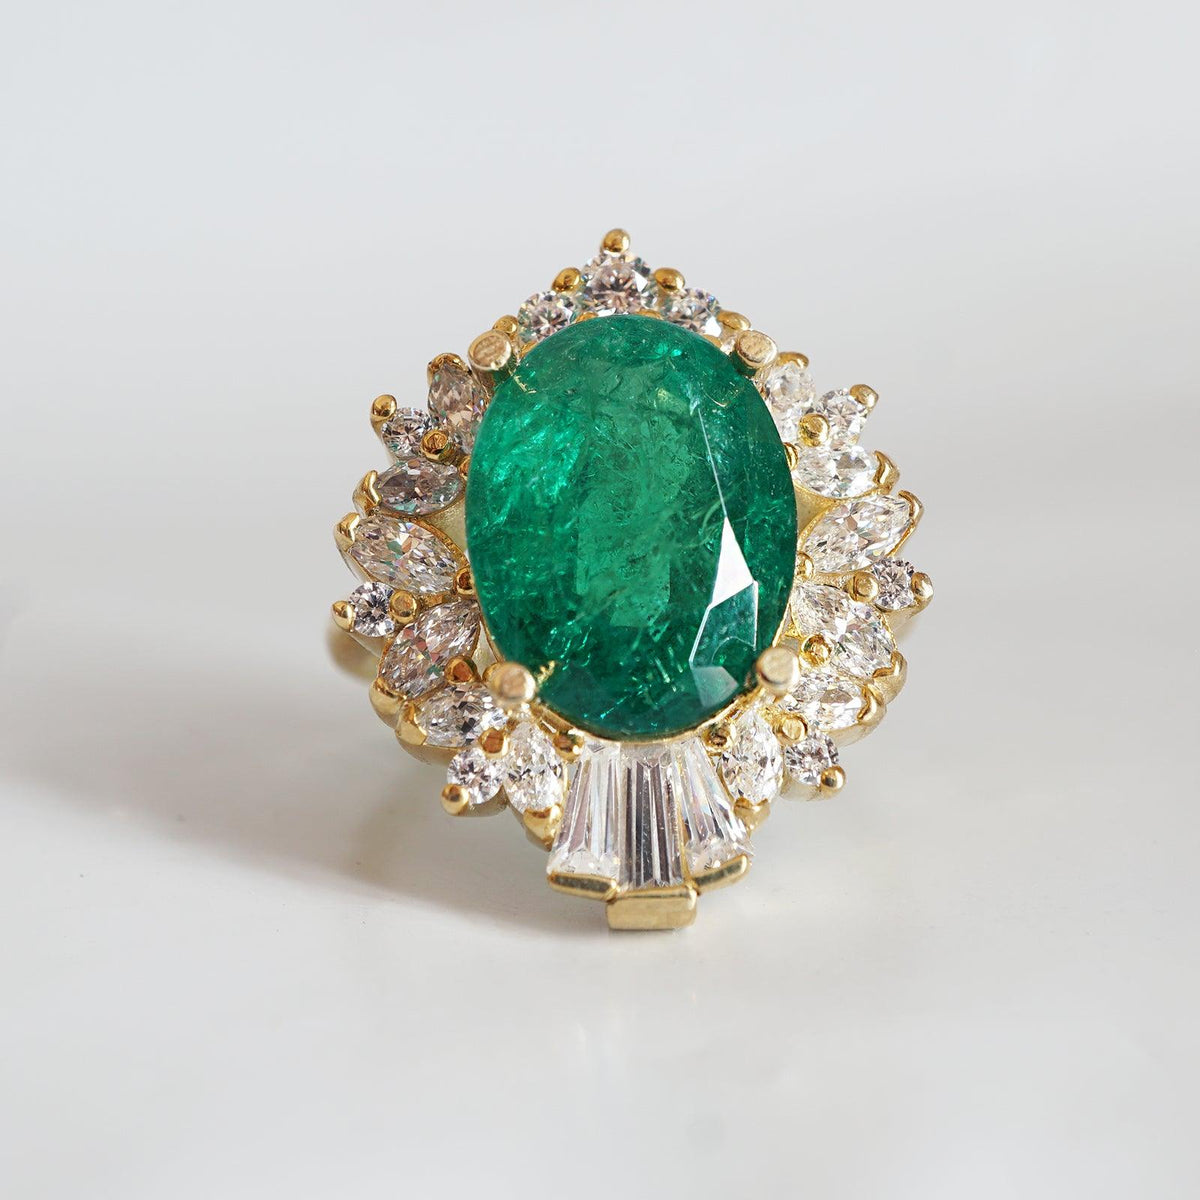 Hall Of Mirrors Oval Emerald Diamond Ring in 14K and 18K Gold, 3.9ct